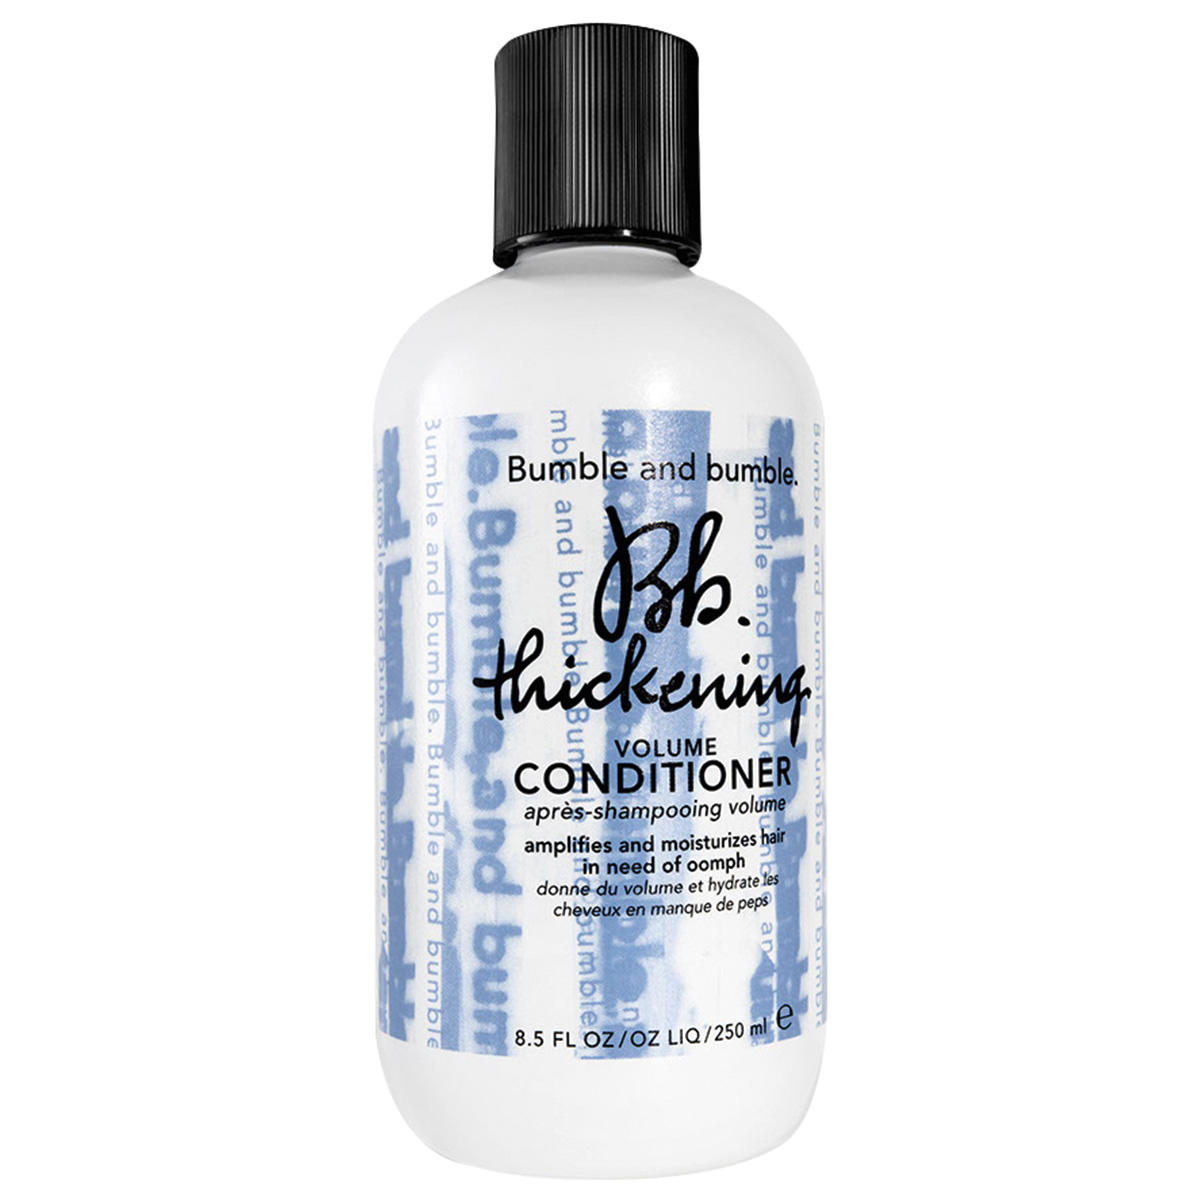 Bumble and bumble Bb. Thickening volume conditioner  - 1